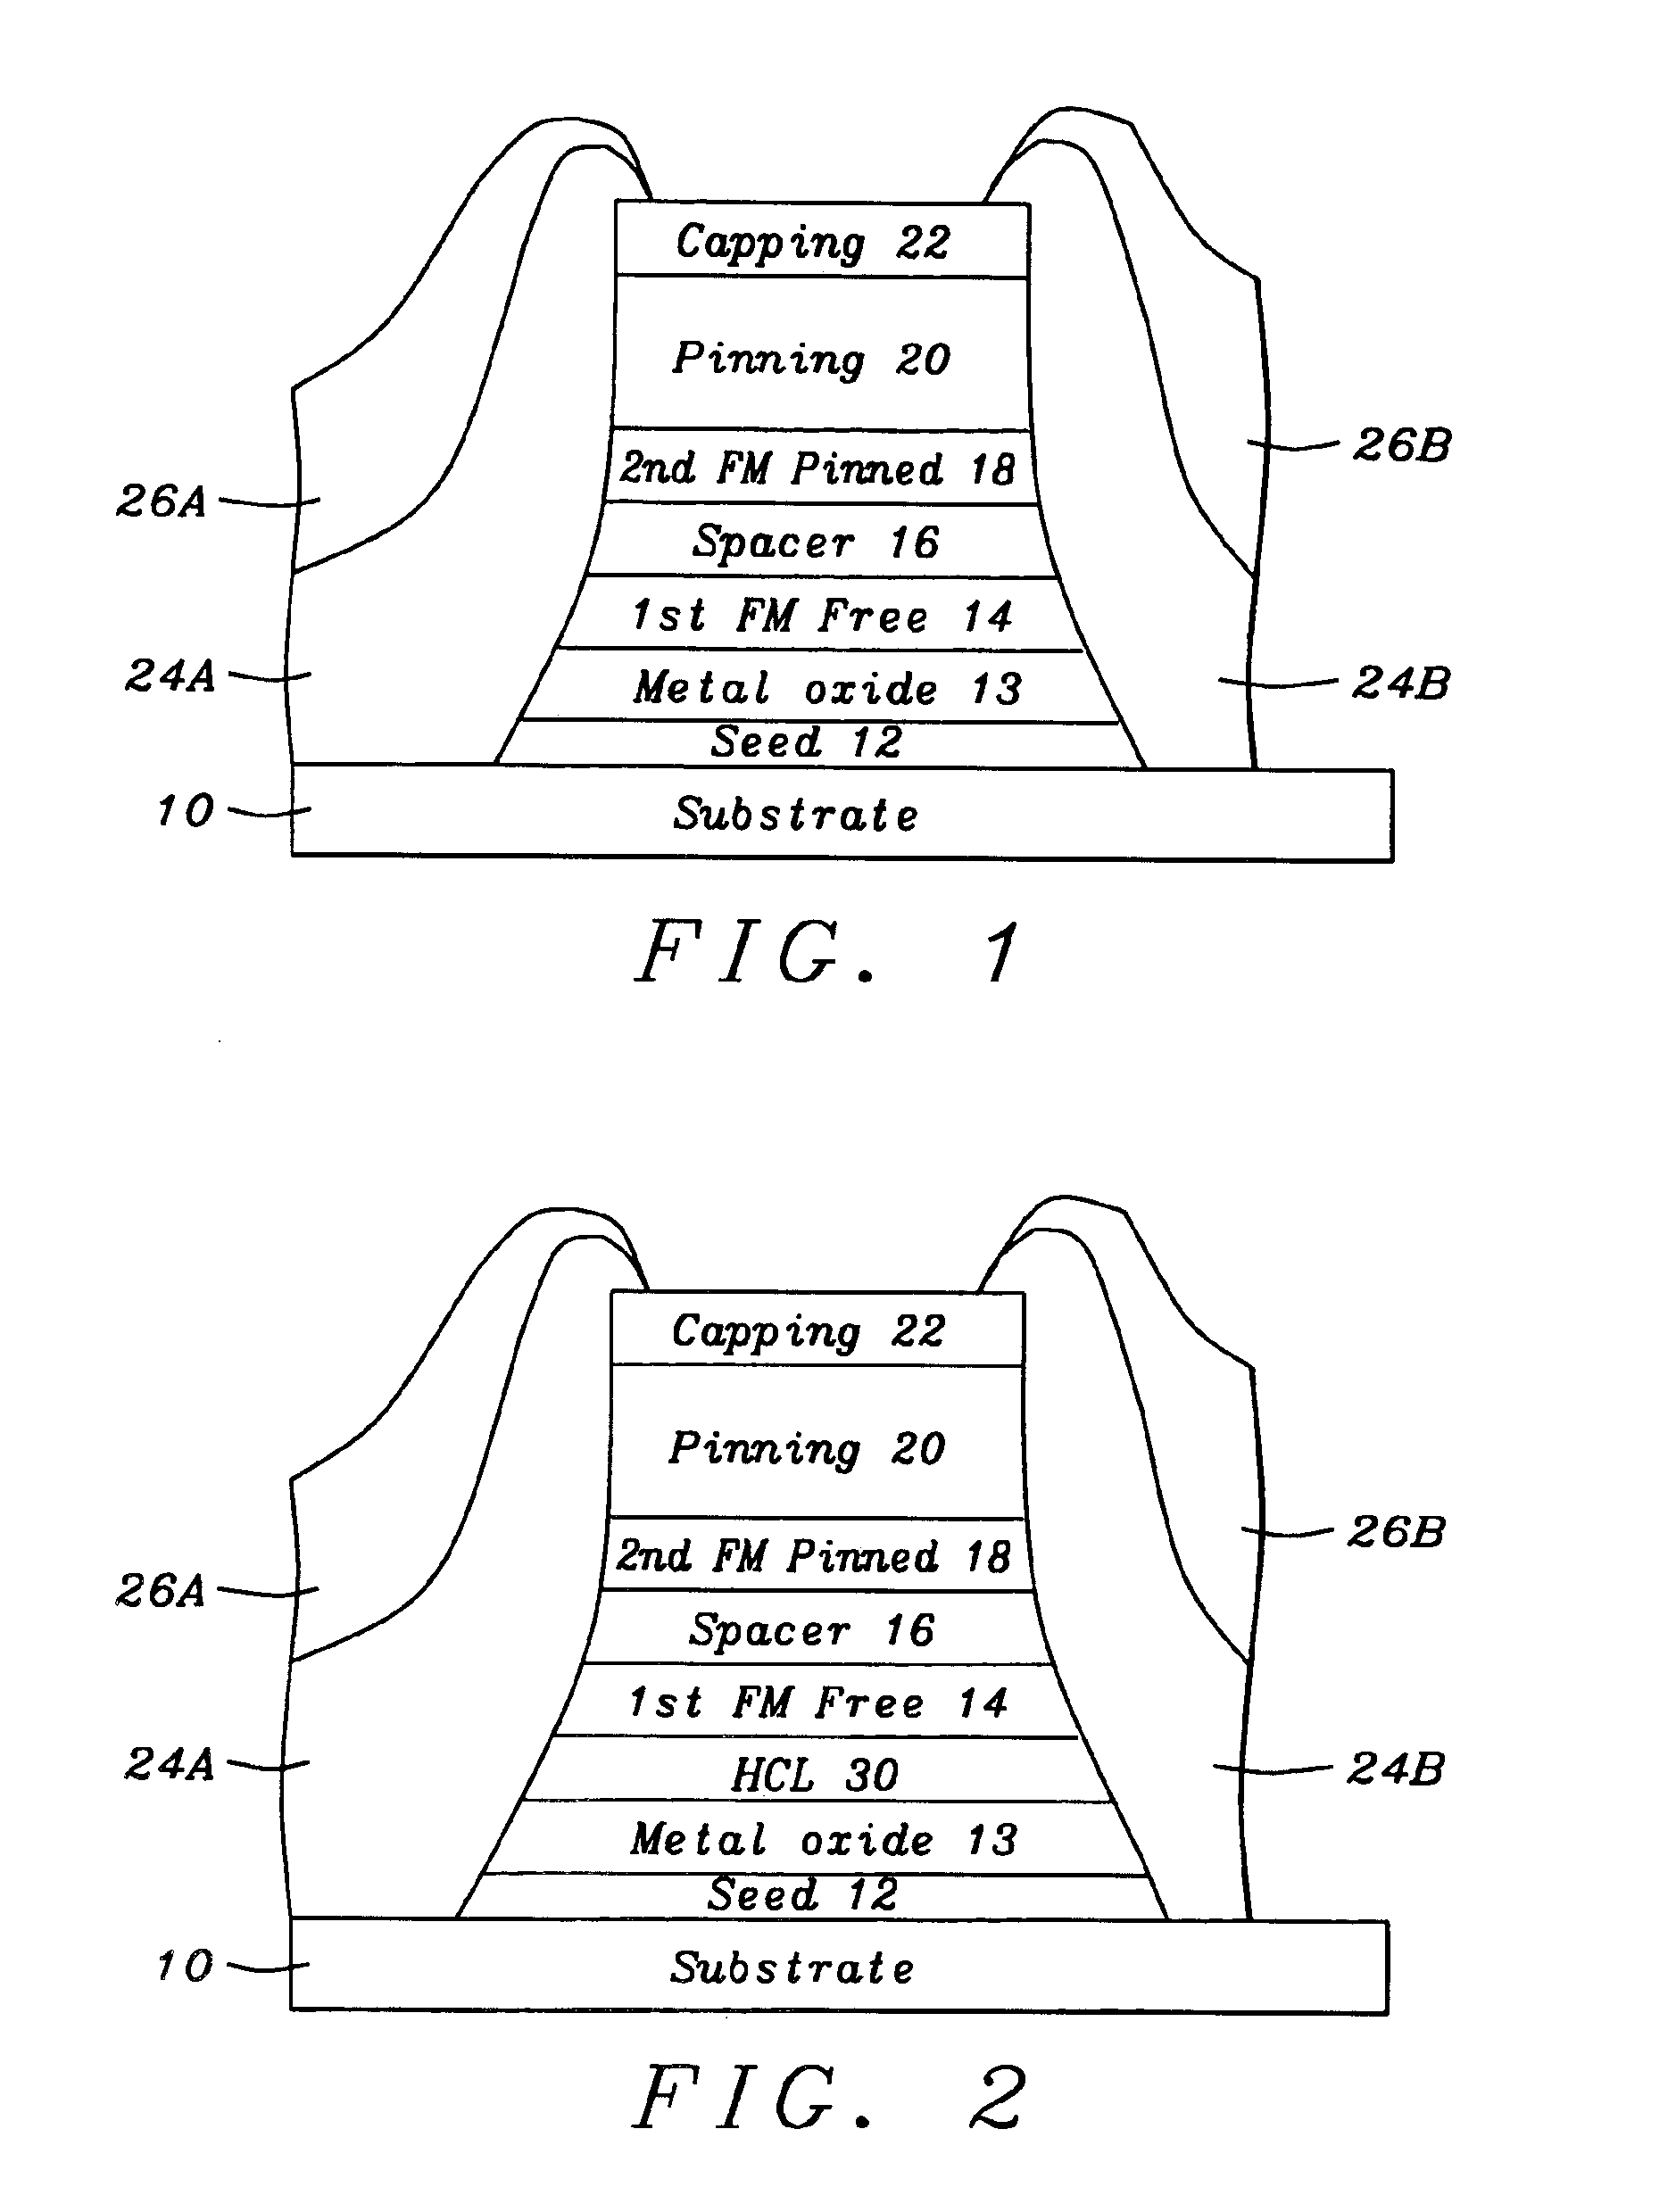 GMR configuration with enhanced spin filtering